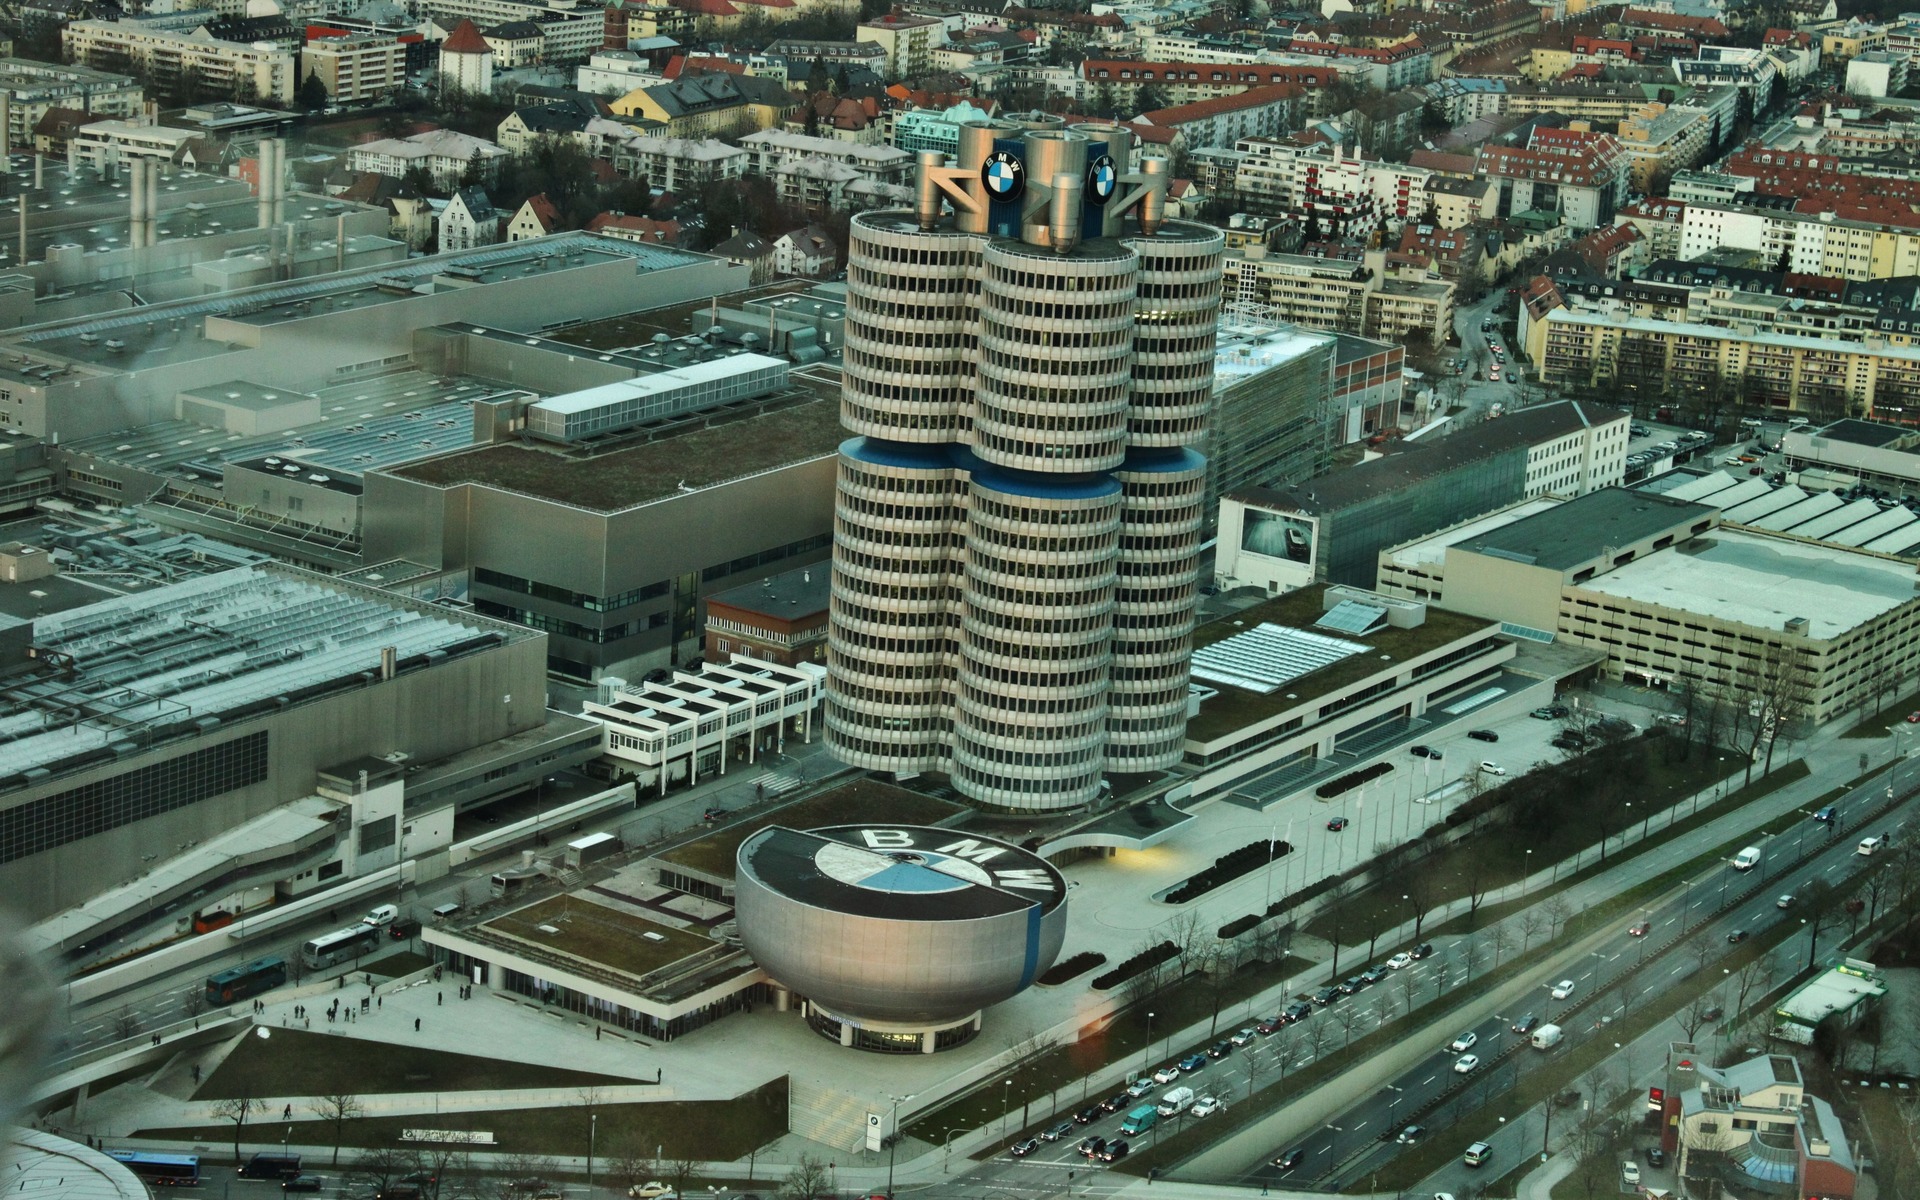 BMW headquarters seen from above